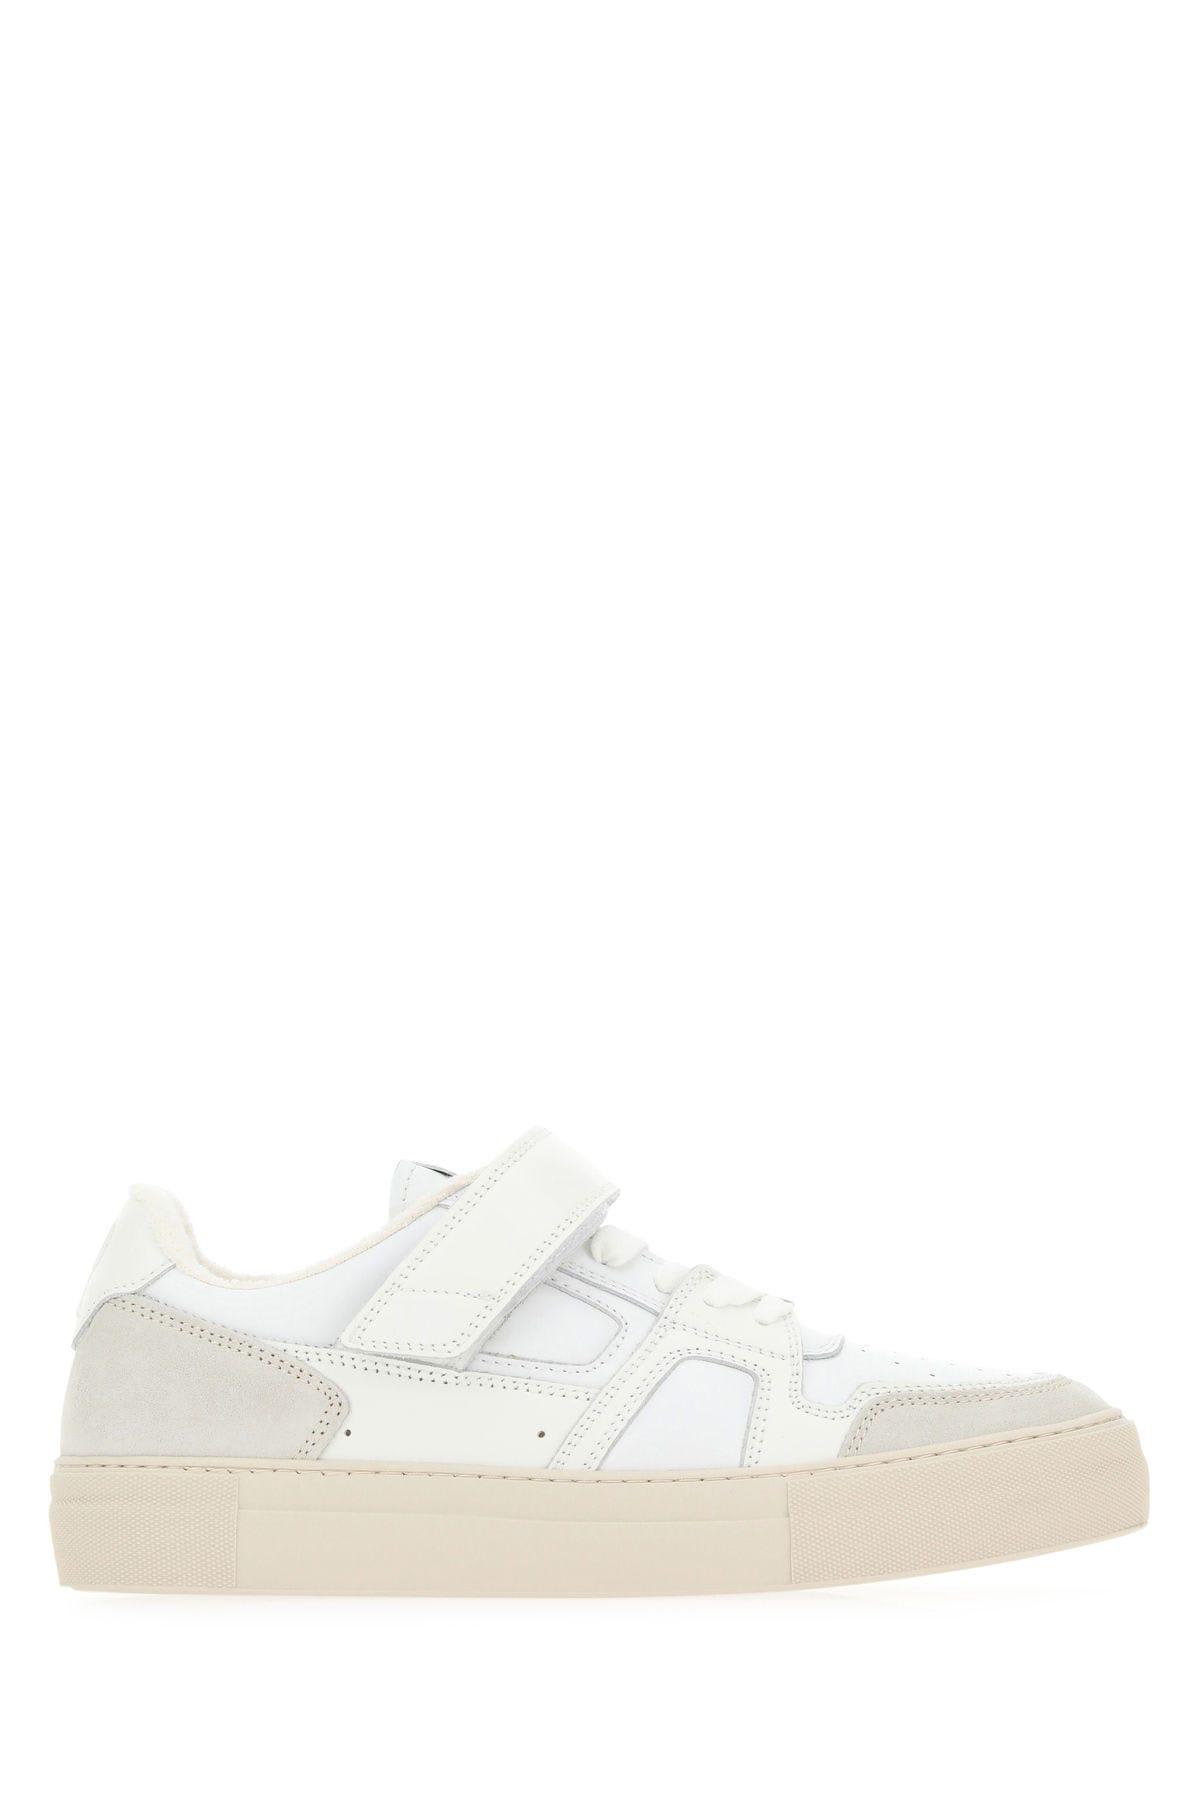 Two-tone Leather And Suede Arcade Sneakers